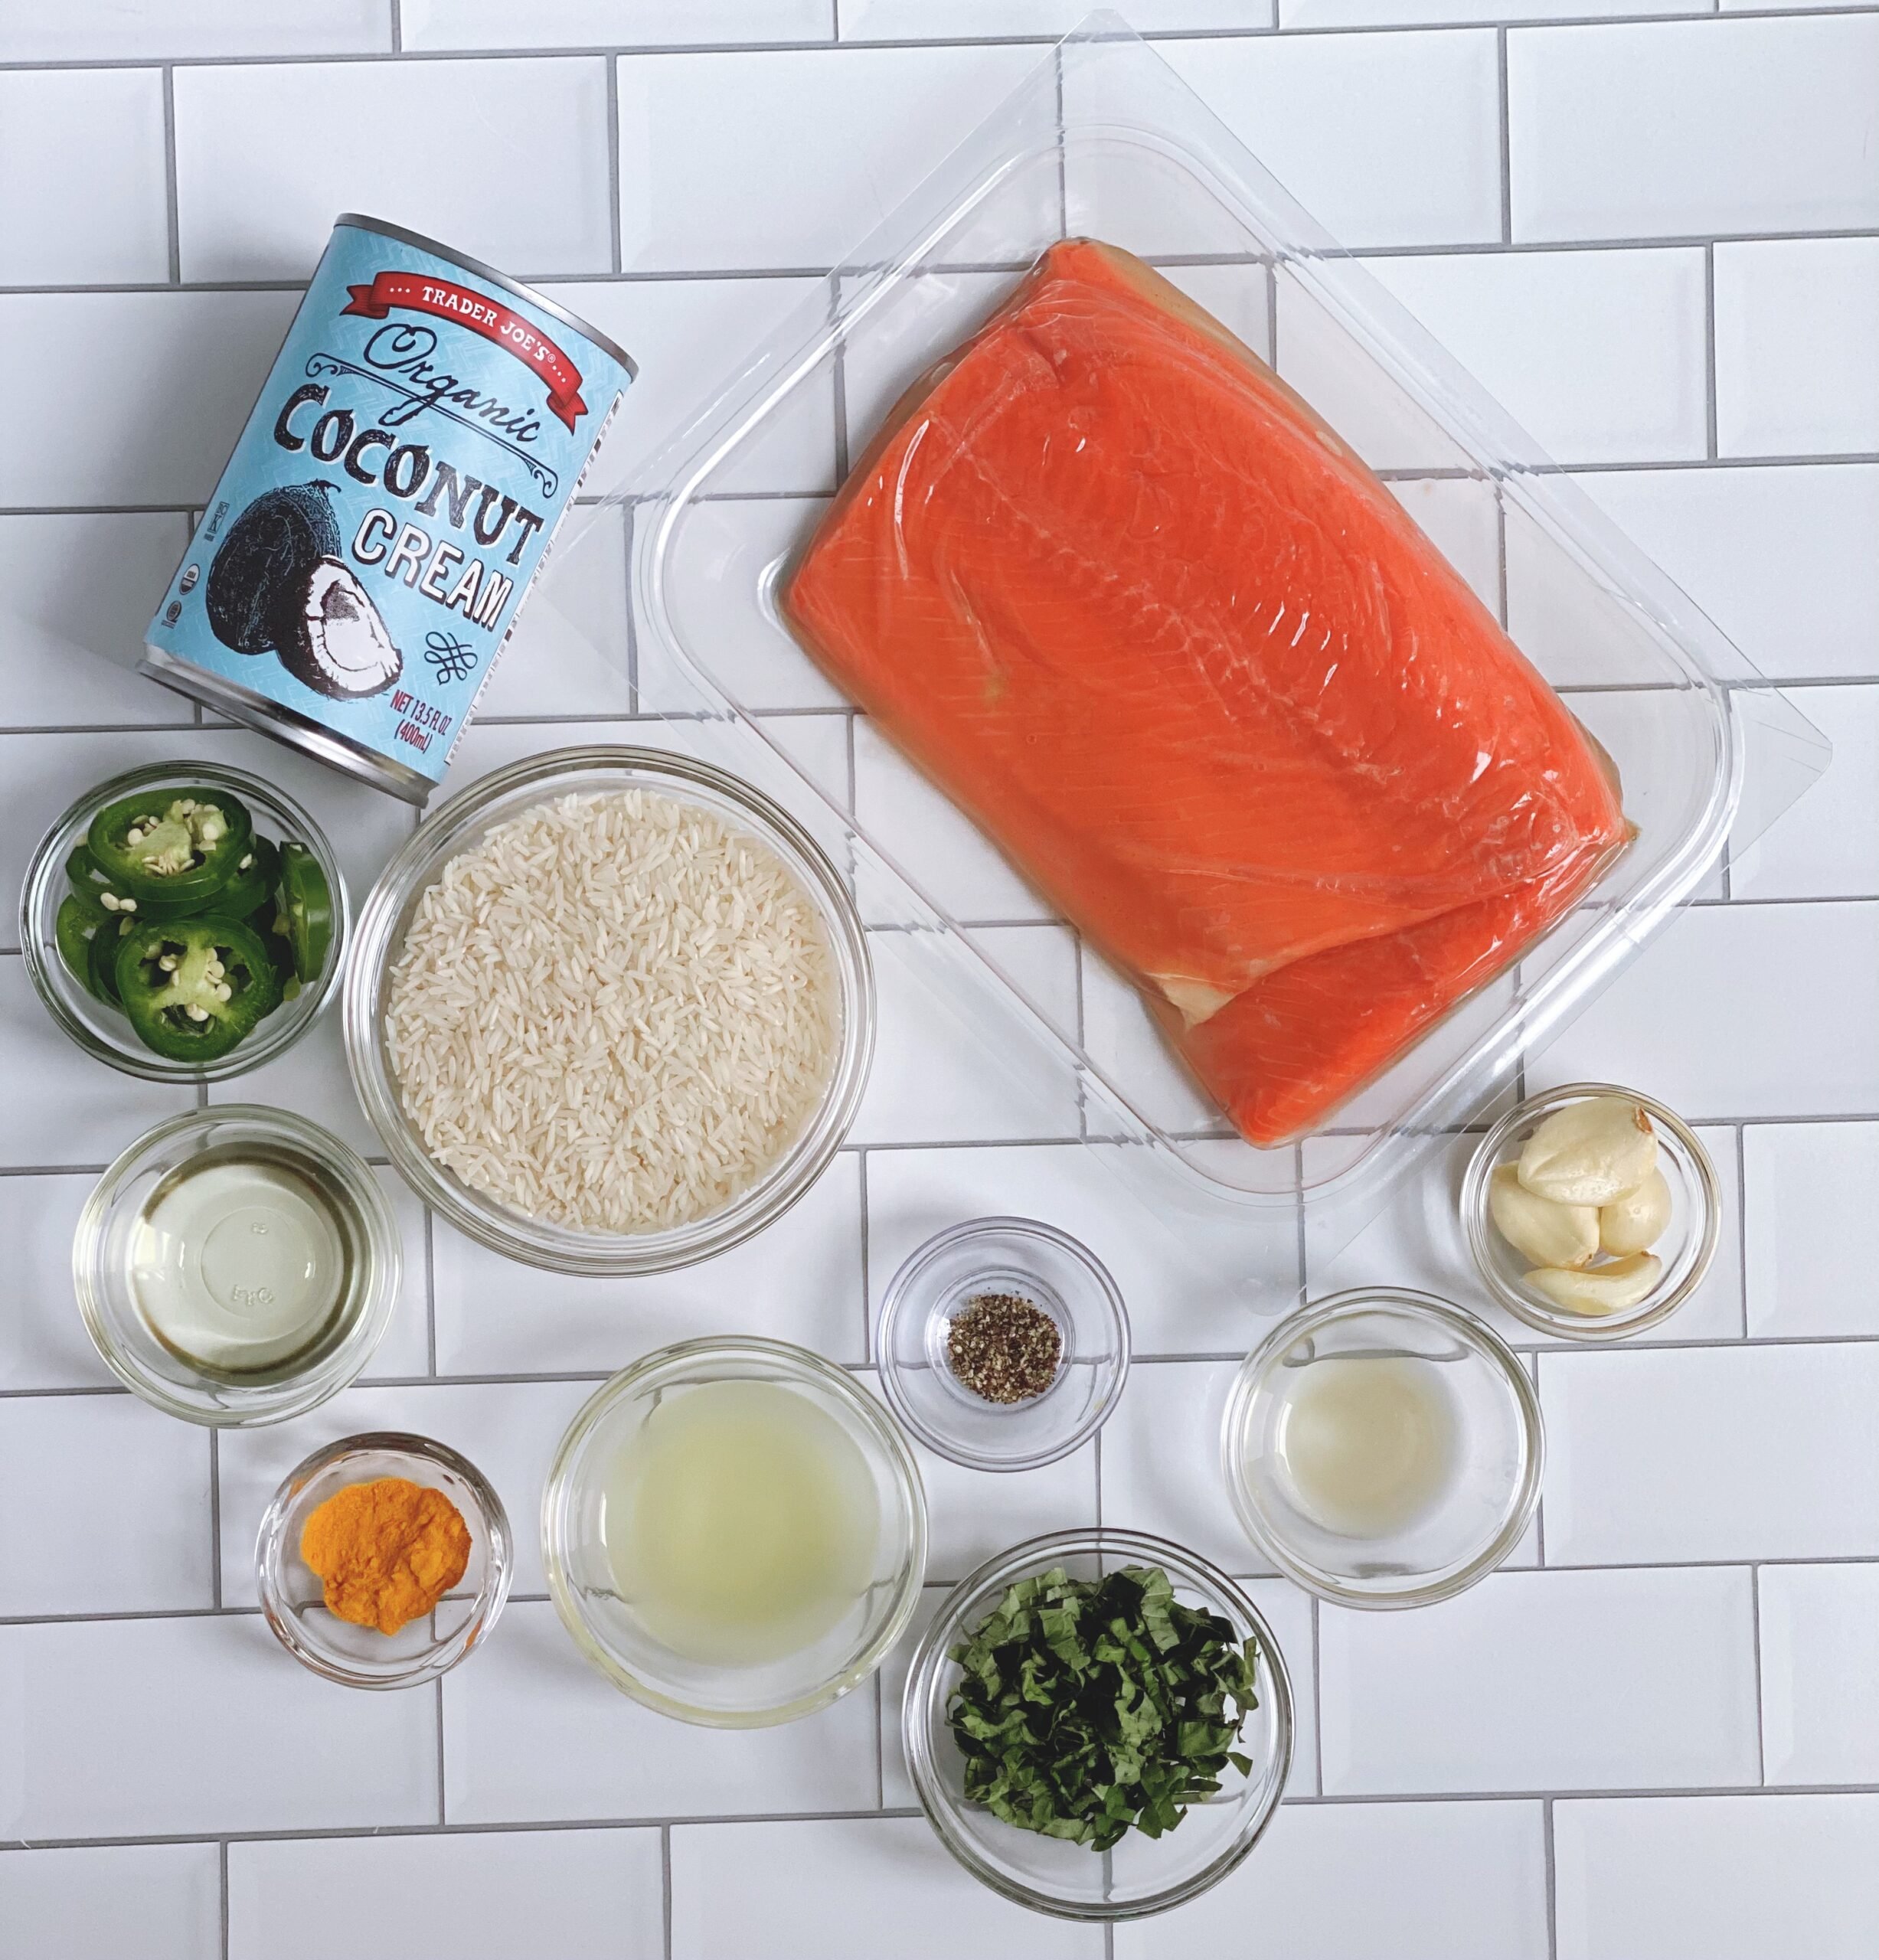 Overhead view of the all the ingredients for the Spicy Coconut Salmon: coconut milk, raw salmon, jasmine rice, jalapenos, tumeric, salt, pepper, scallions, garlic cloves, canola oil and lime juice